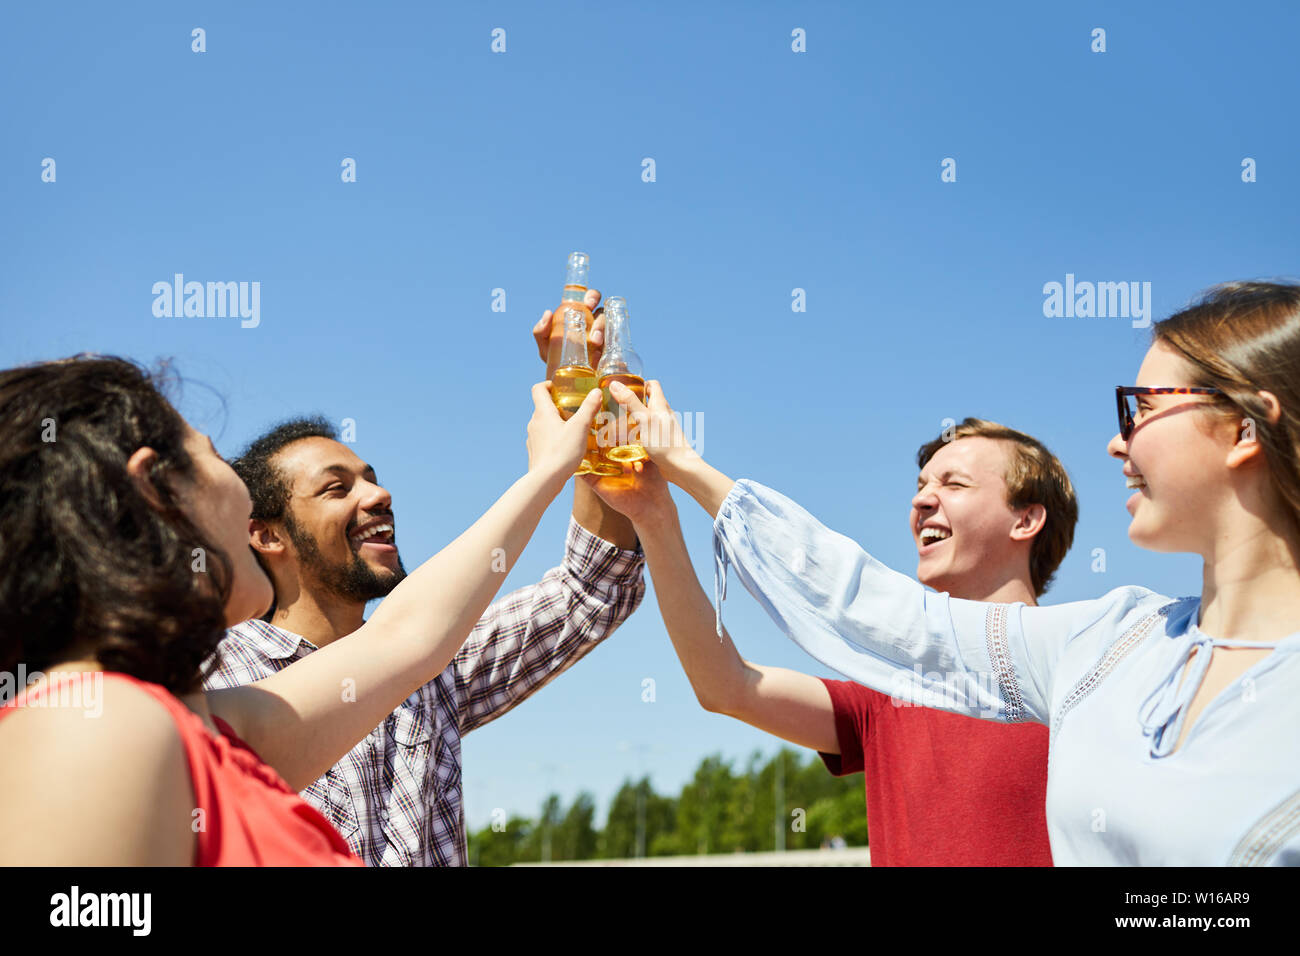 Waist up portrait of happy young friends clinking beer bottles against blue sky in Summer, copy space Stock Photo